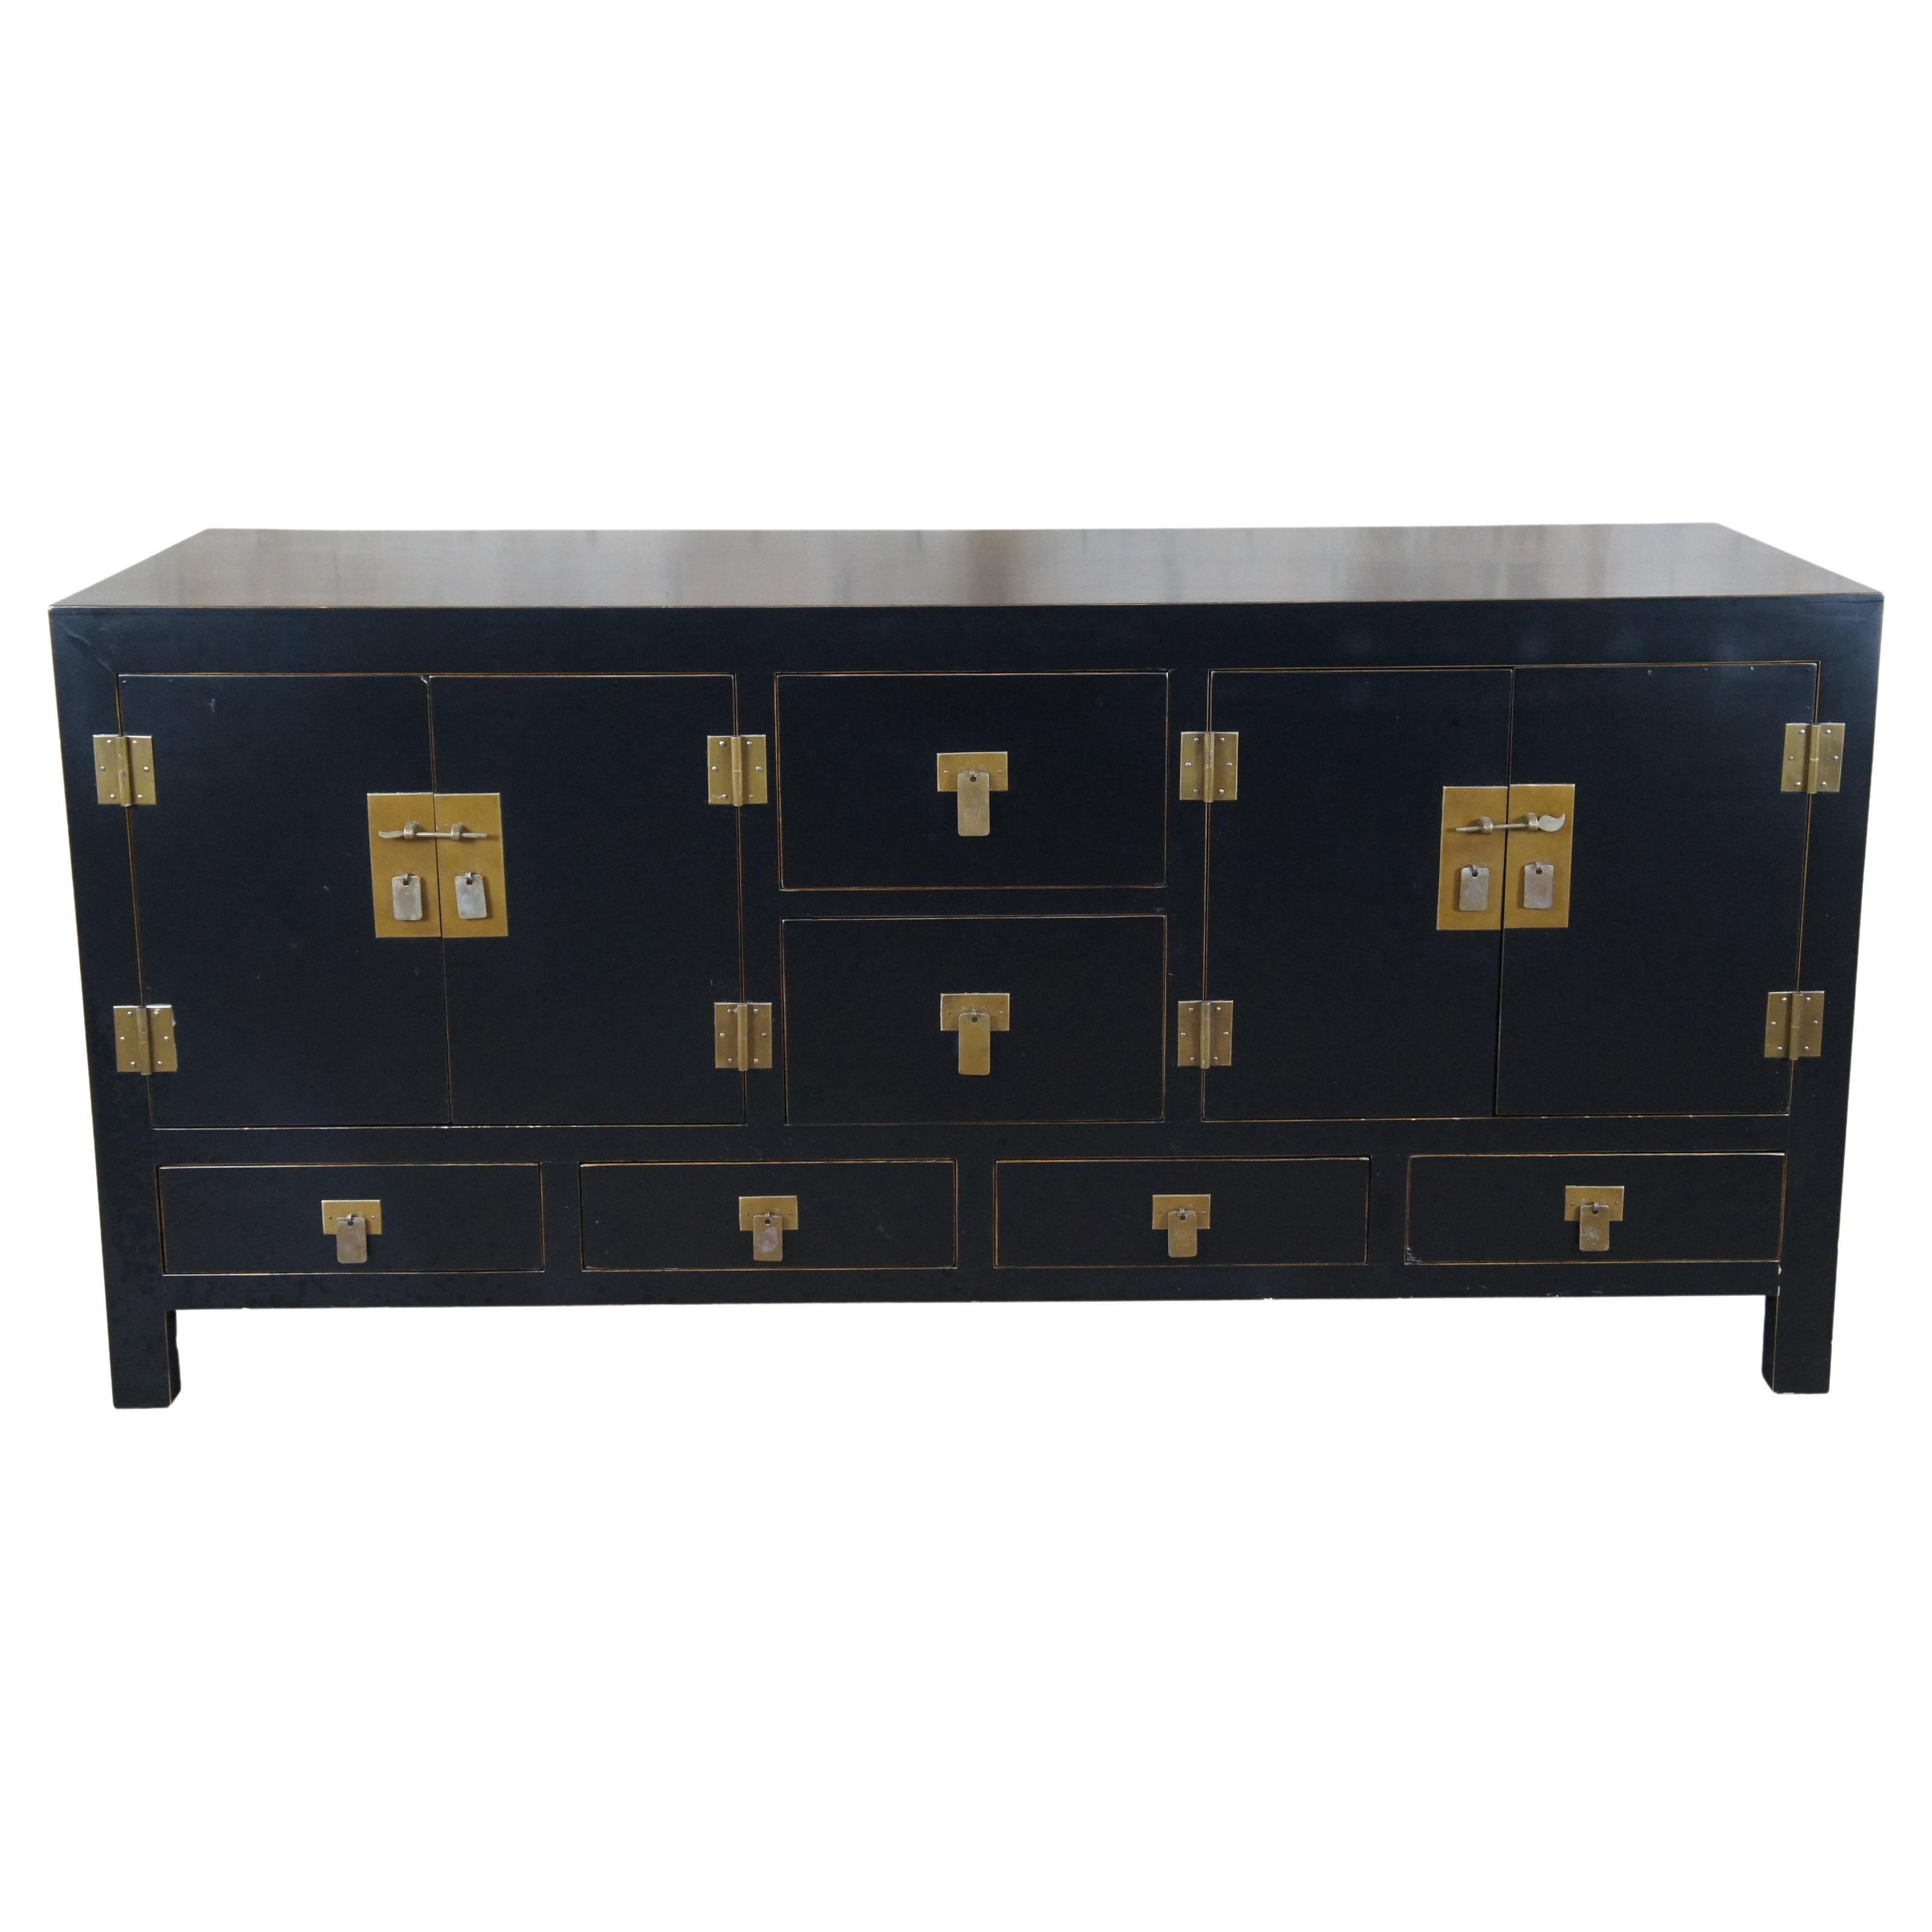 Vintage Chinese Black Ming Style Modern Sideboard Buffet Console Cabinet Coffer